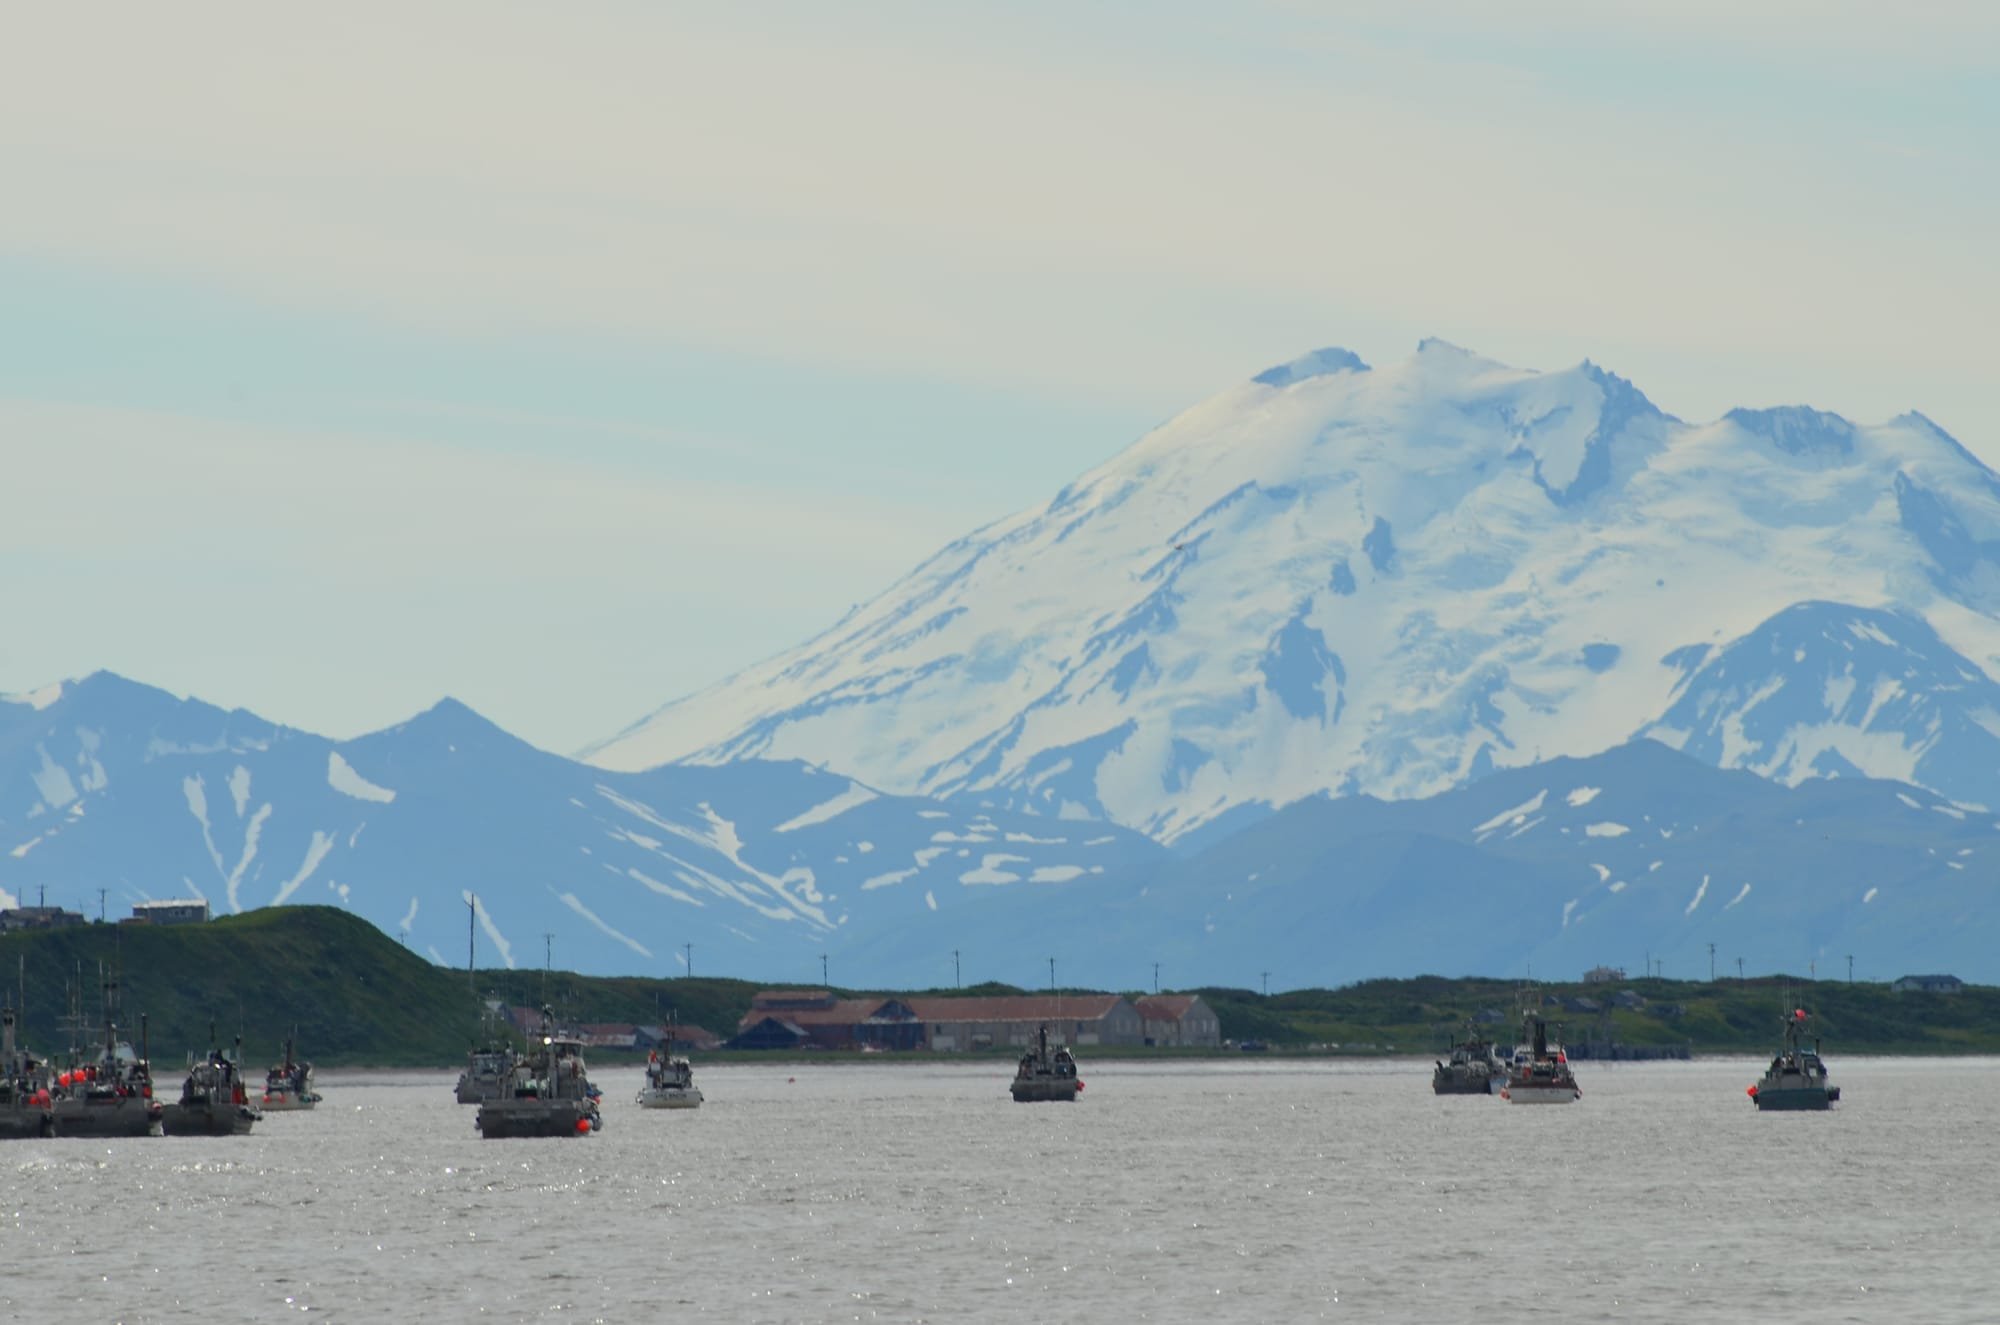 Mount Chiginagak is my favorite mountain in Alaska, It has a large presence here in the Ugsahik river district.